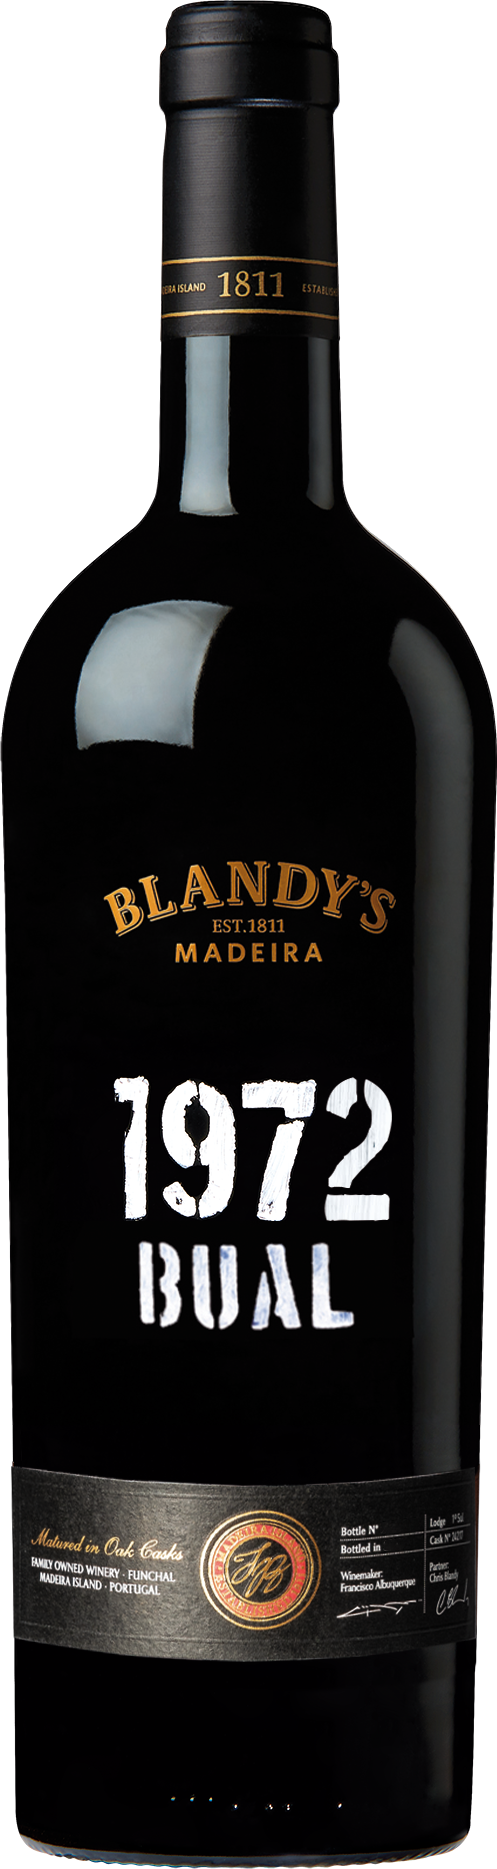 Product Image for BLANDY'S VINTAGE BUAL 1972